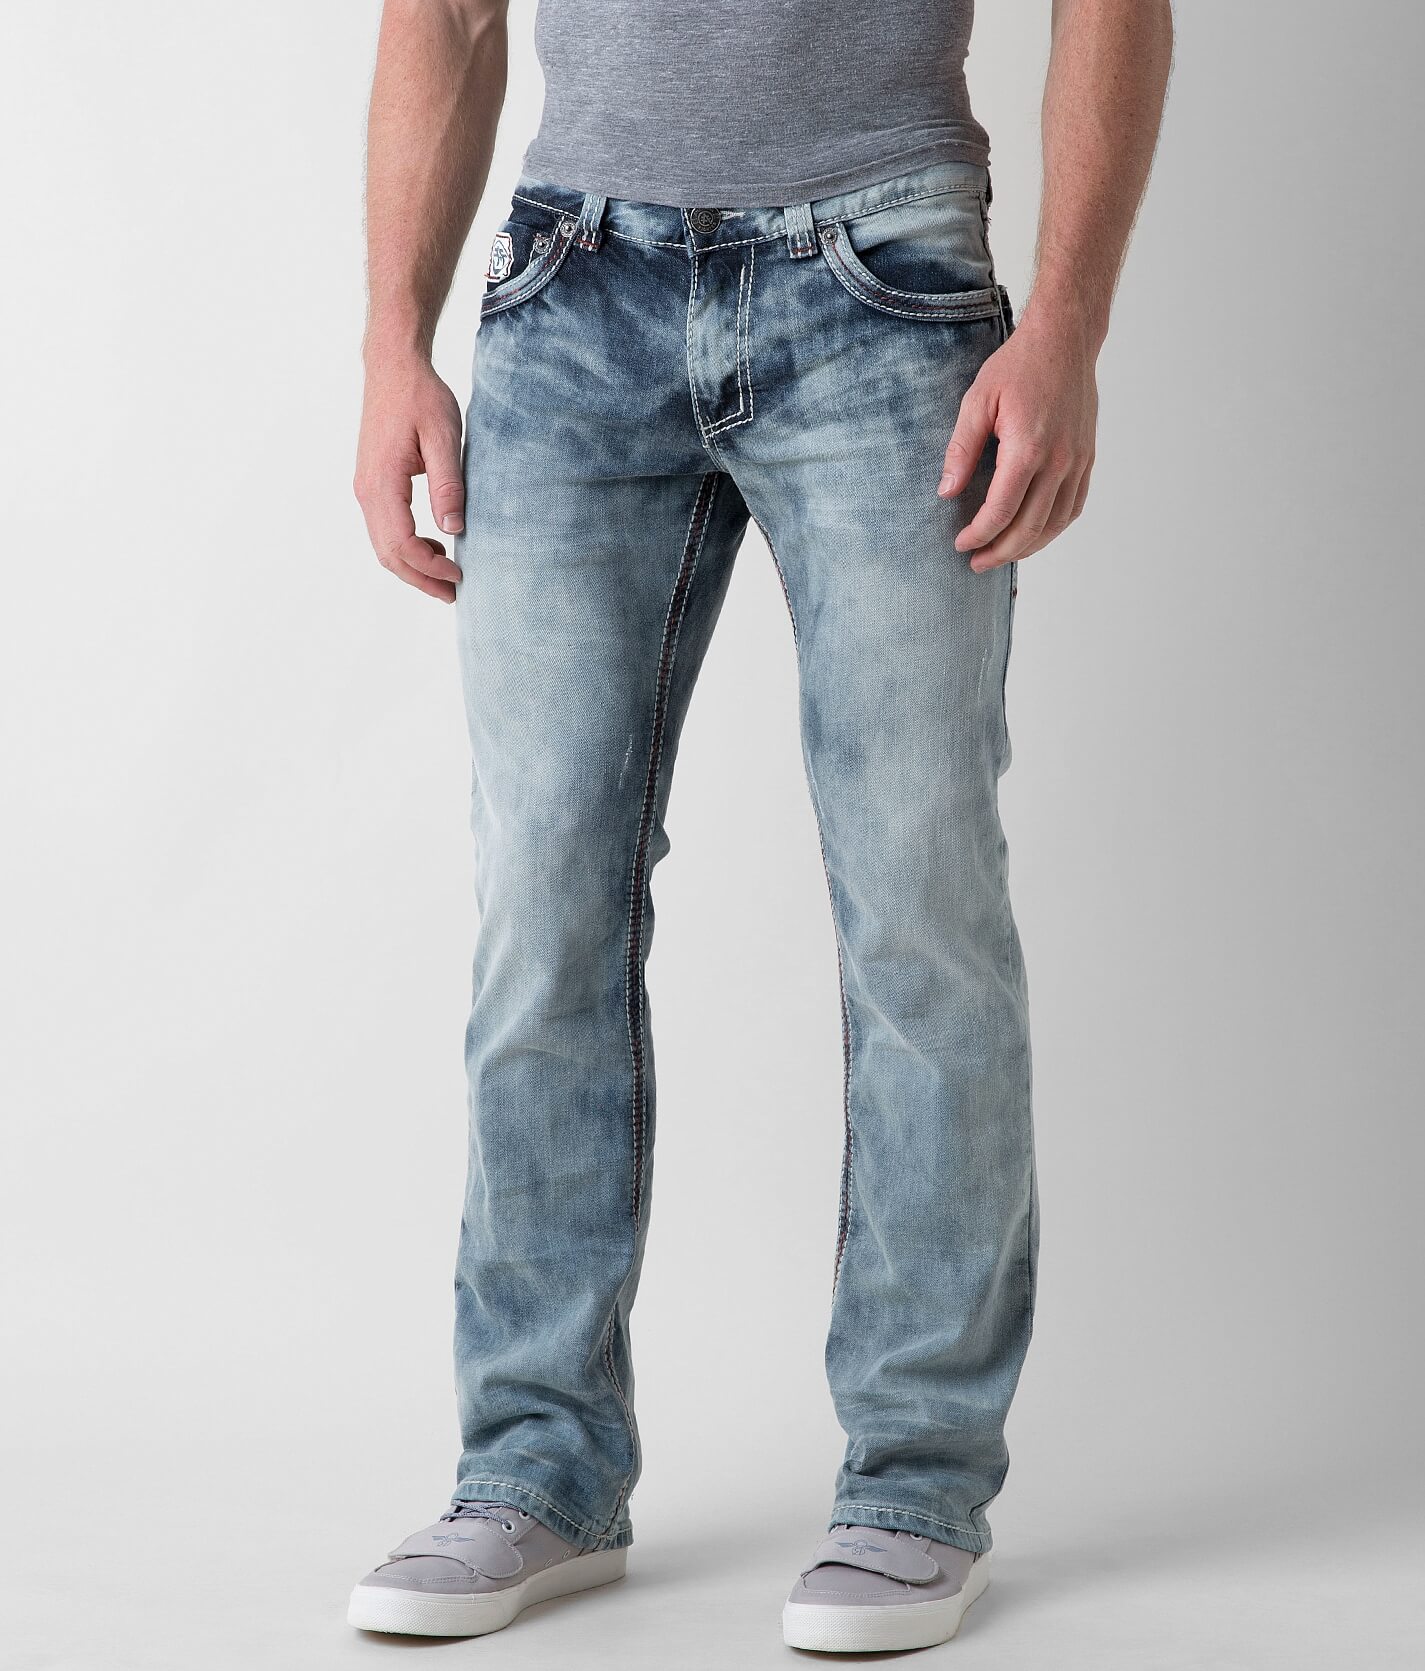 american fighter mens jeans